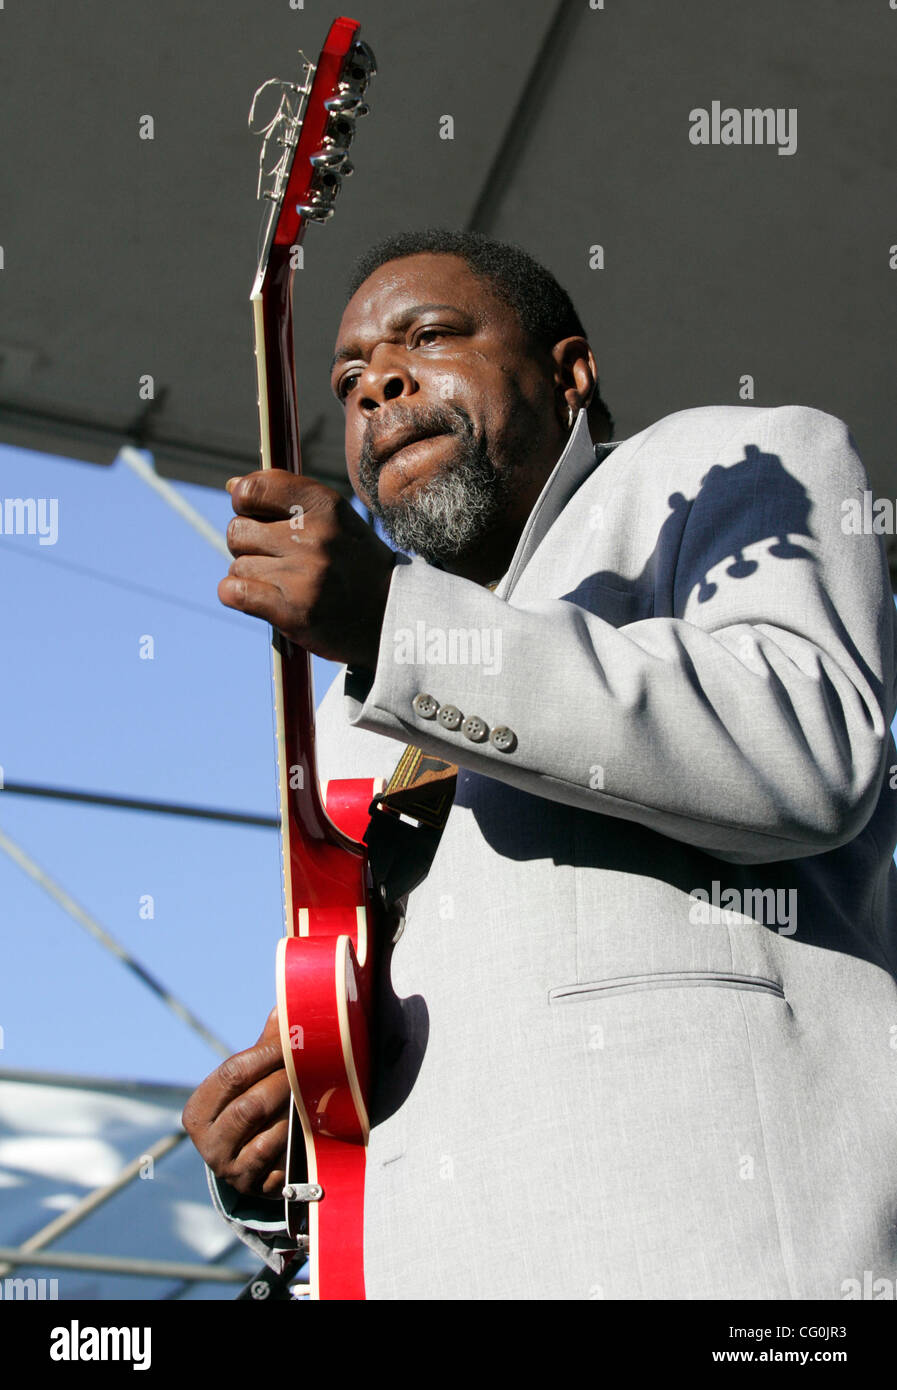 Jul 04, 2007 - Portland, OR, USA - LURRIE BELL performs at the Portland Waterfront Blues Festival. The five-day festival is said to be the largest blues festival west of the Mississippi River. (Credit Image: © Richard Clement/ZUMA Press) Stock Photo